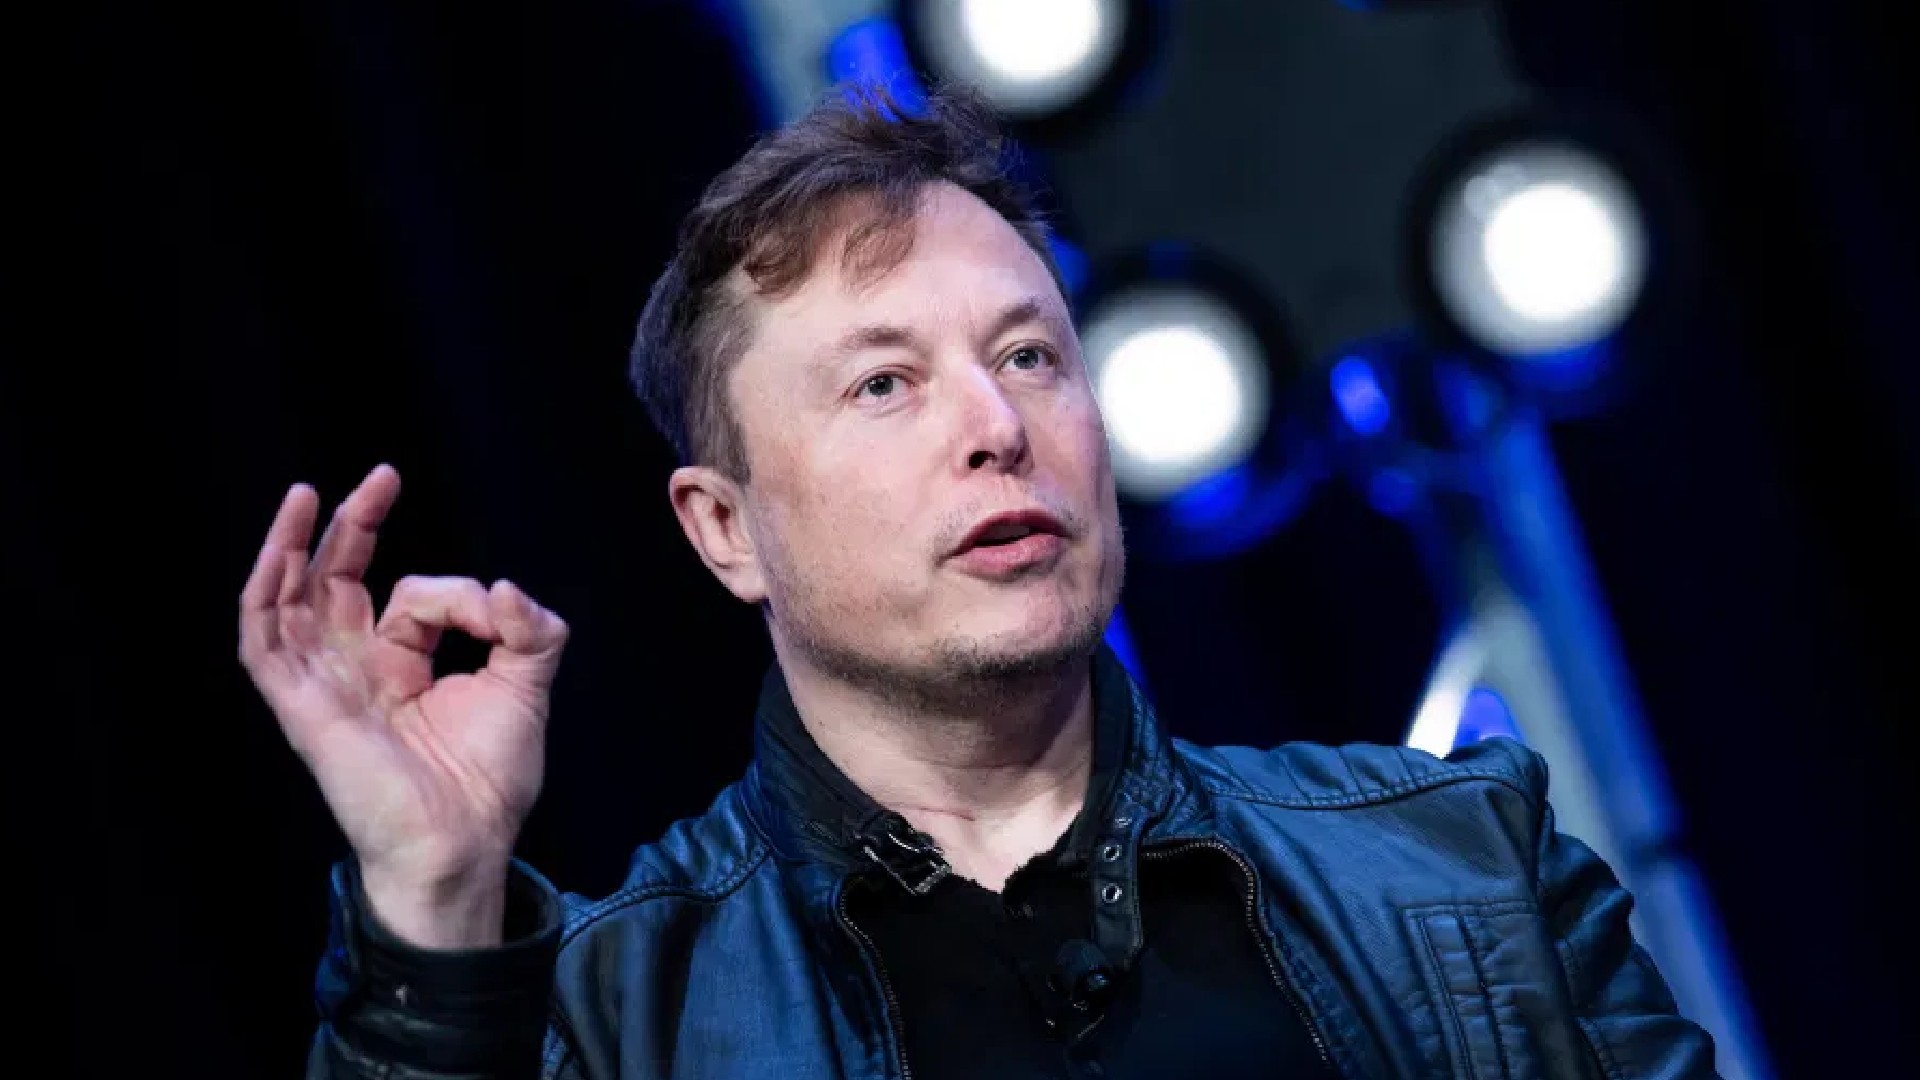 SpaceX CEO Elon Musk Expected To Evolve The World’s First Trillionaire By 2024